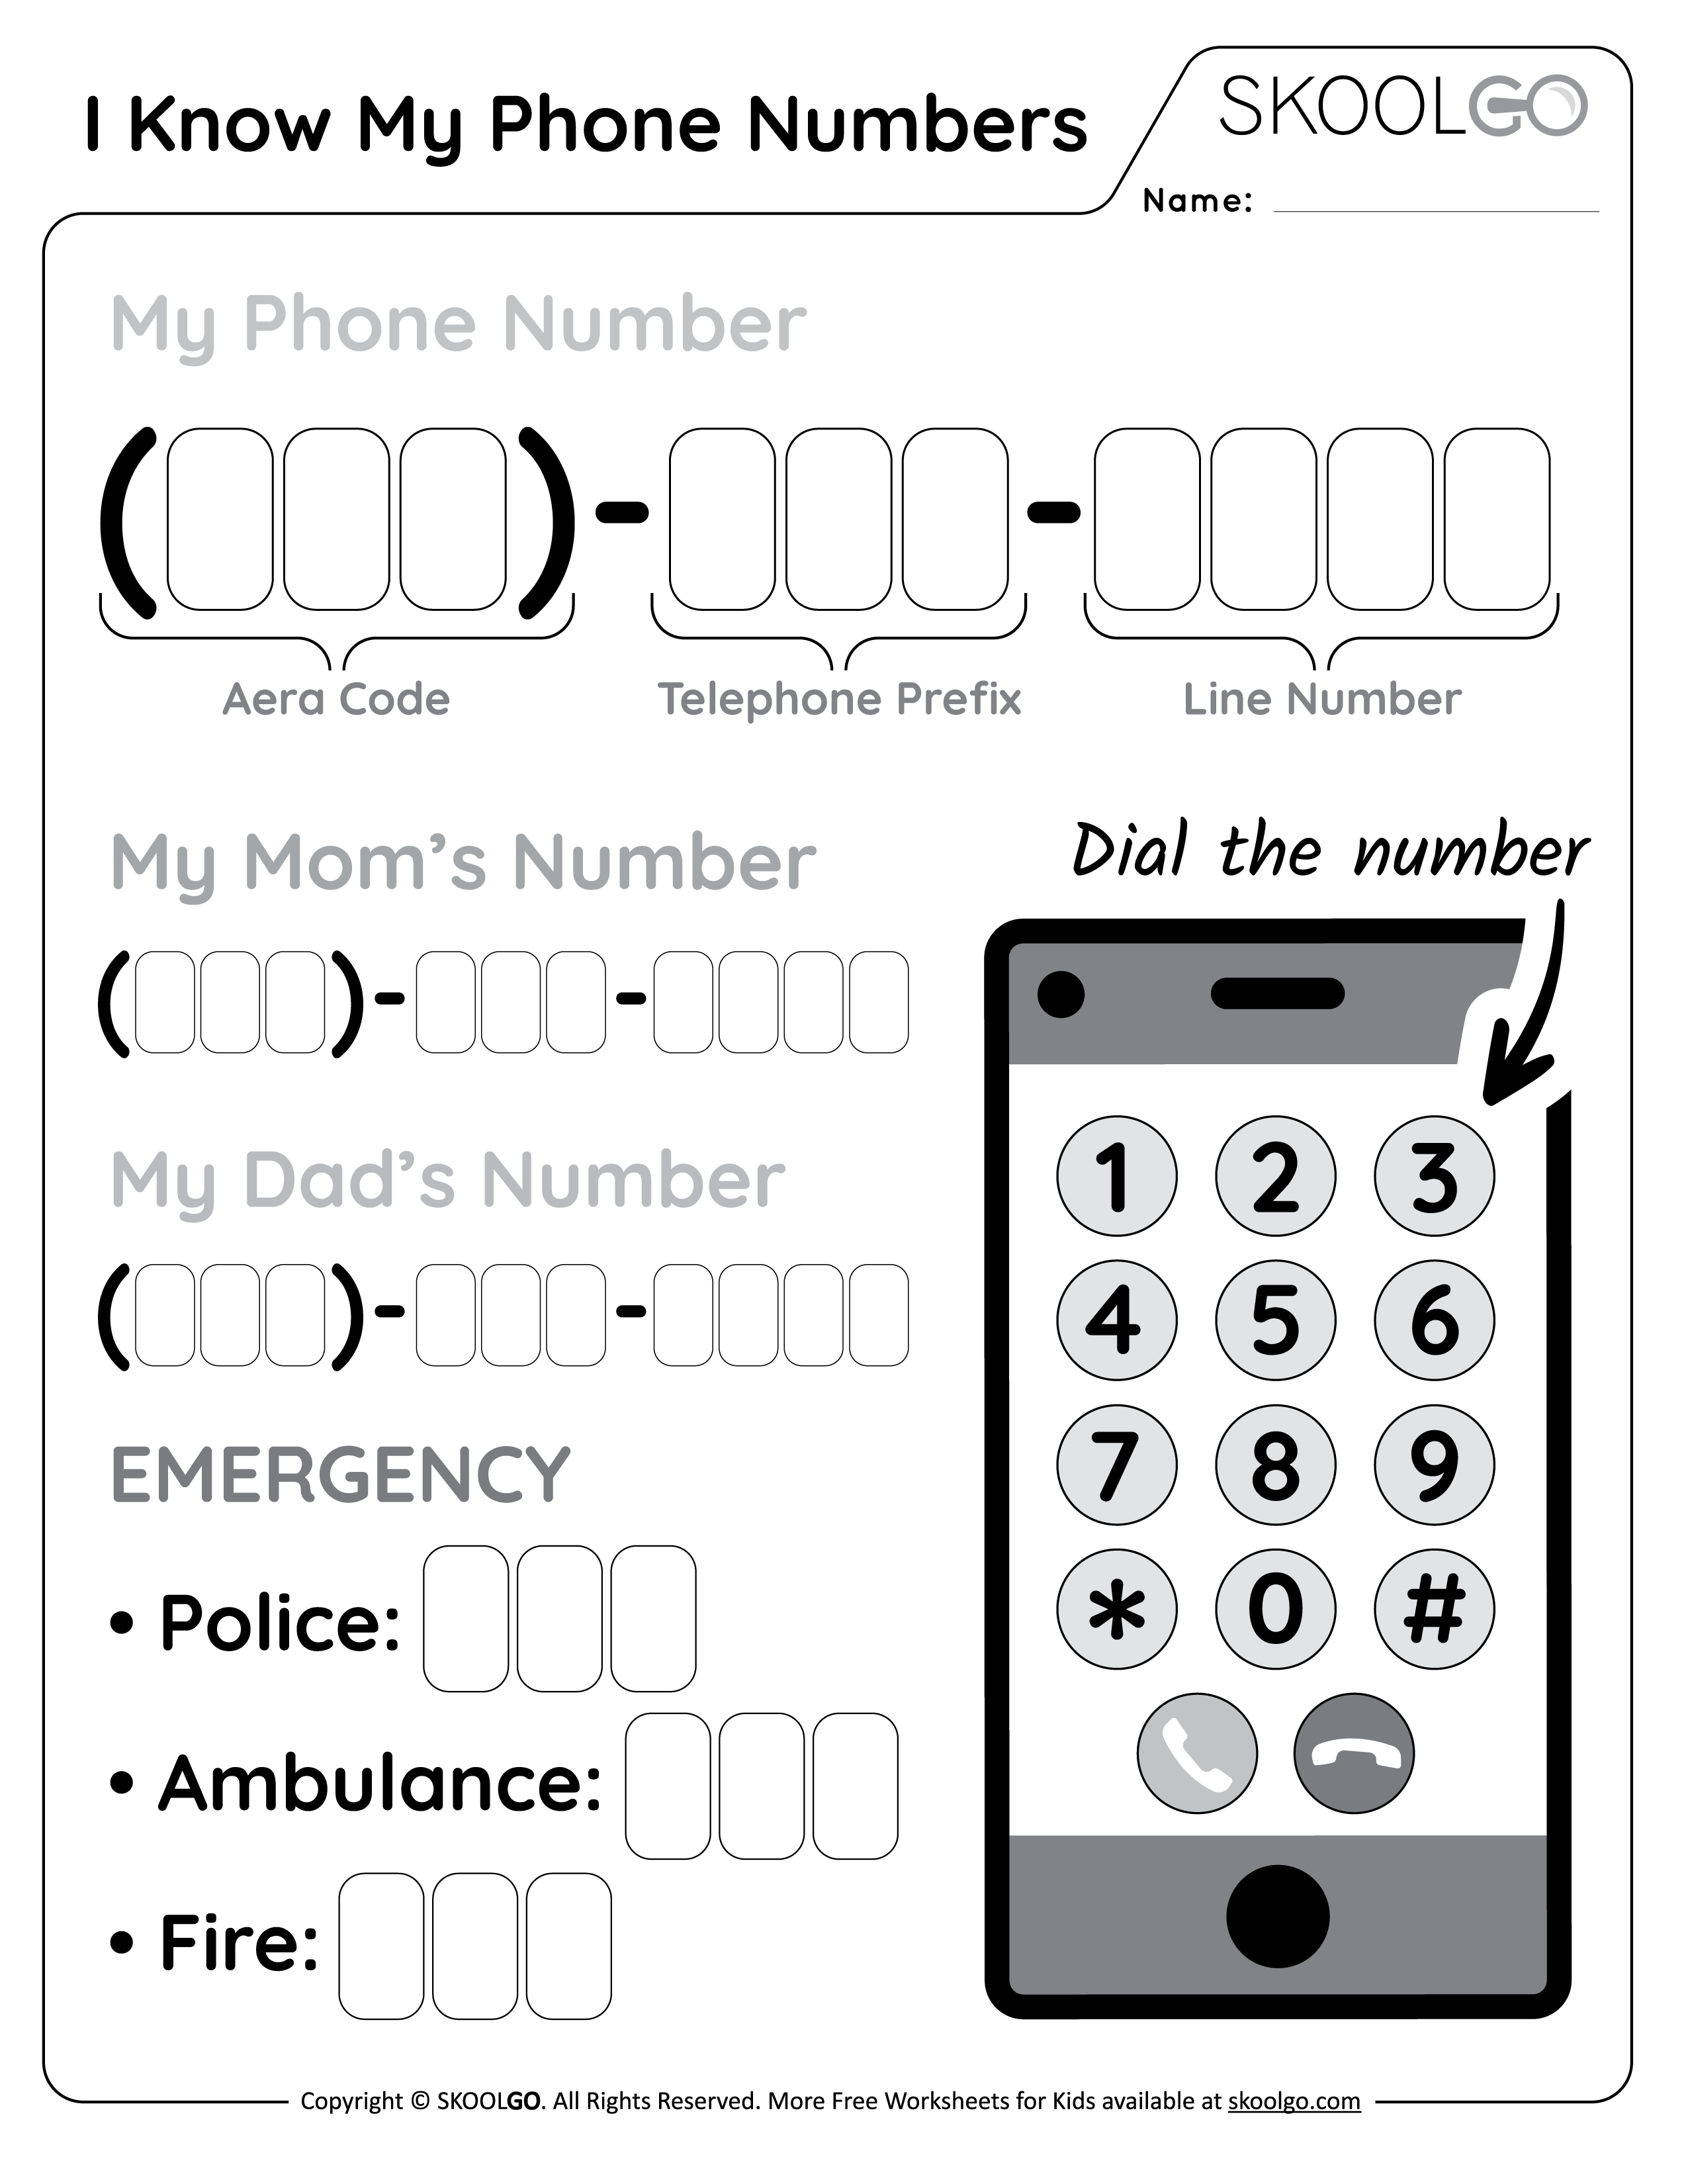 I Know My Phone Numbers - Free Worksheet for Kids - Black and White